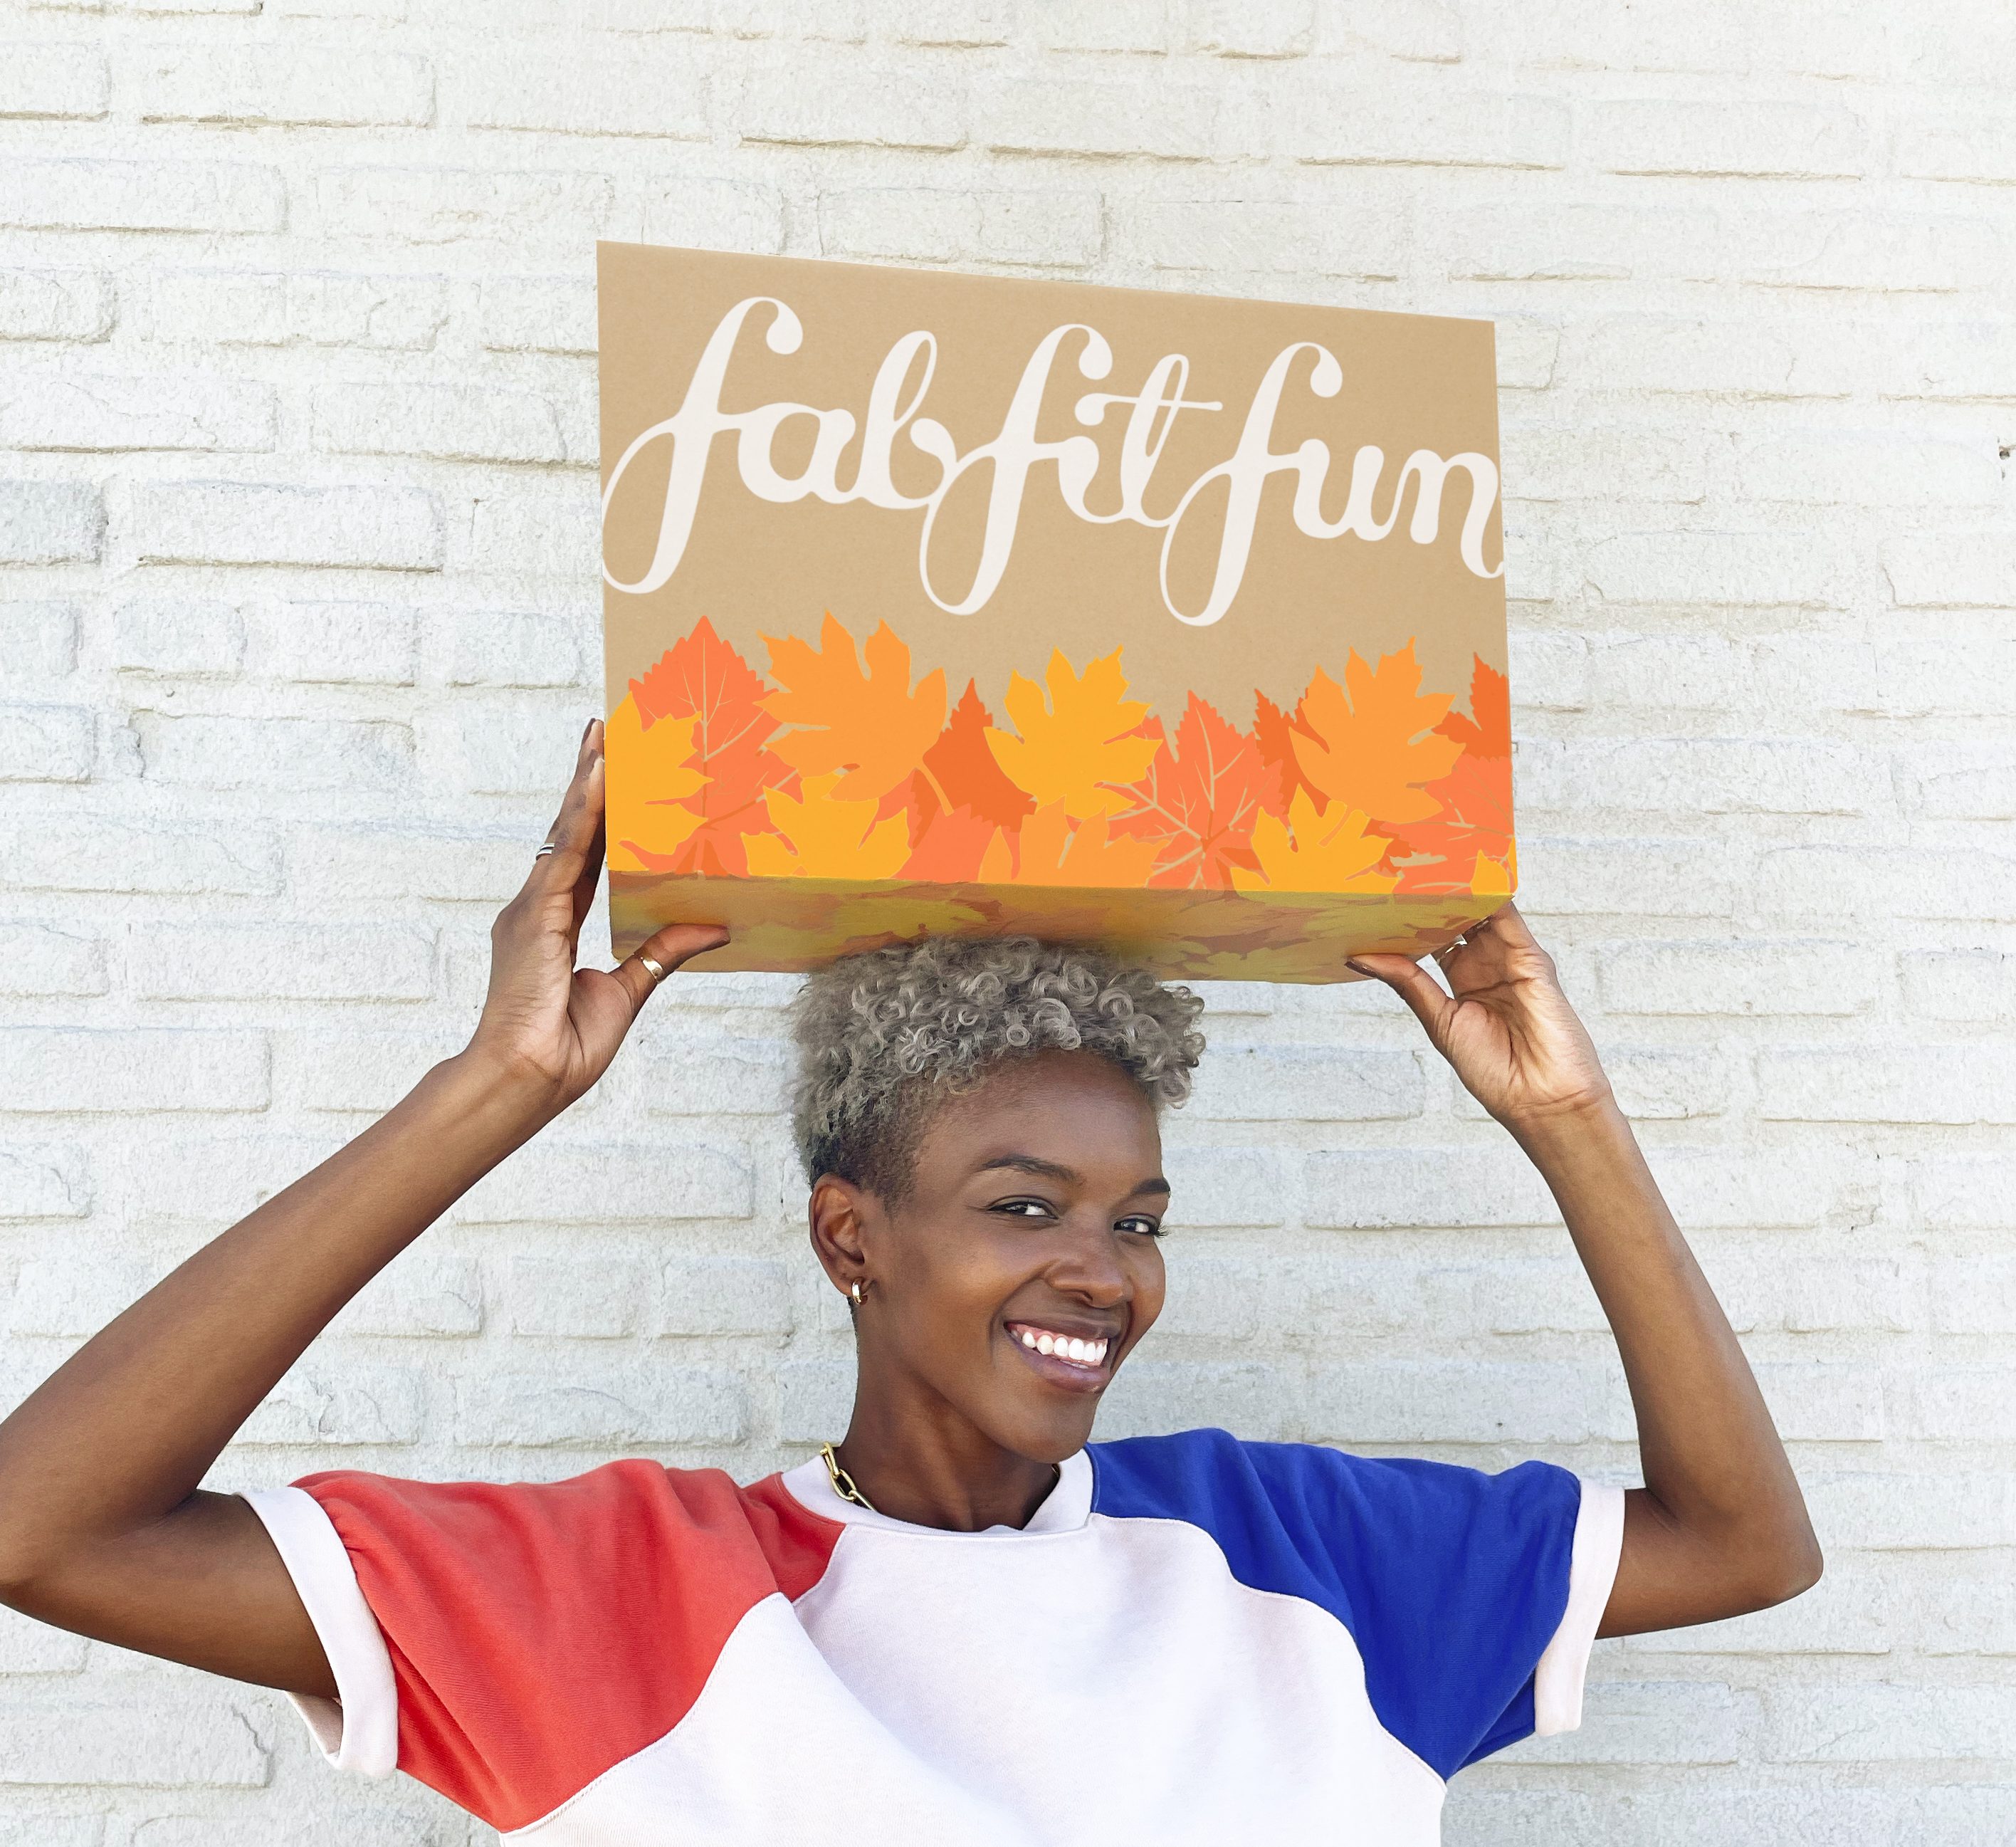 FabFitFun Spring Box '19: A Backpack for Every Occasion with Deux Lux   From the gym to work and drinks with your BFF, this adjustable Deux Lux  backpack is versatile enough for